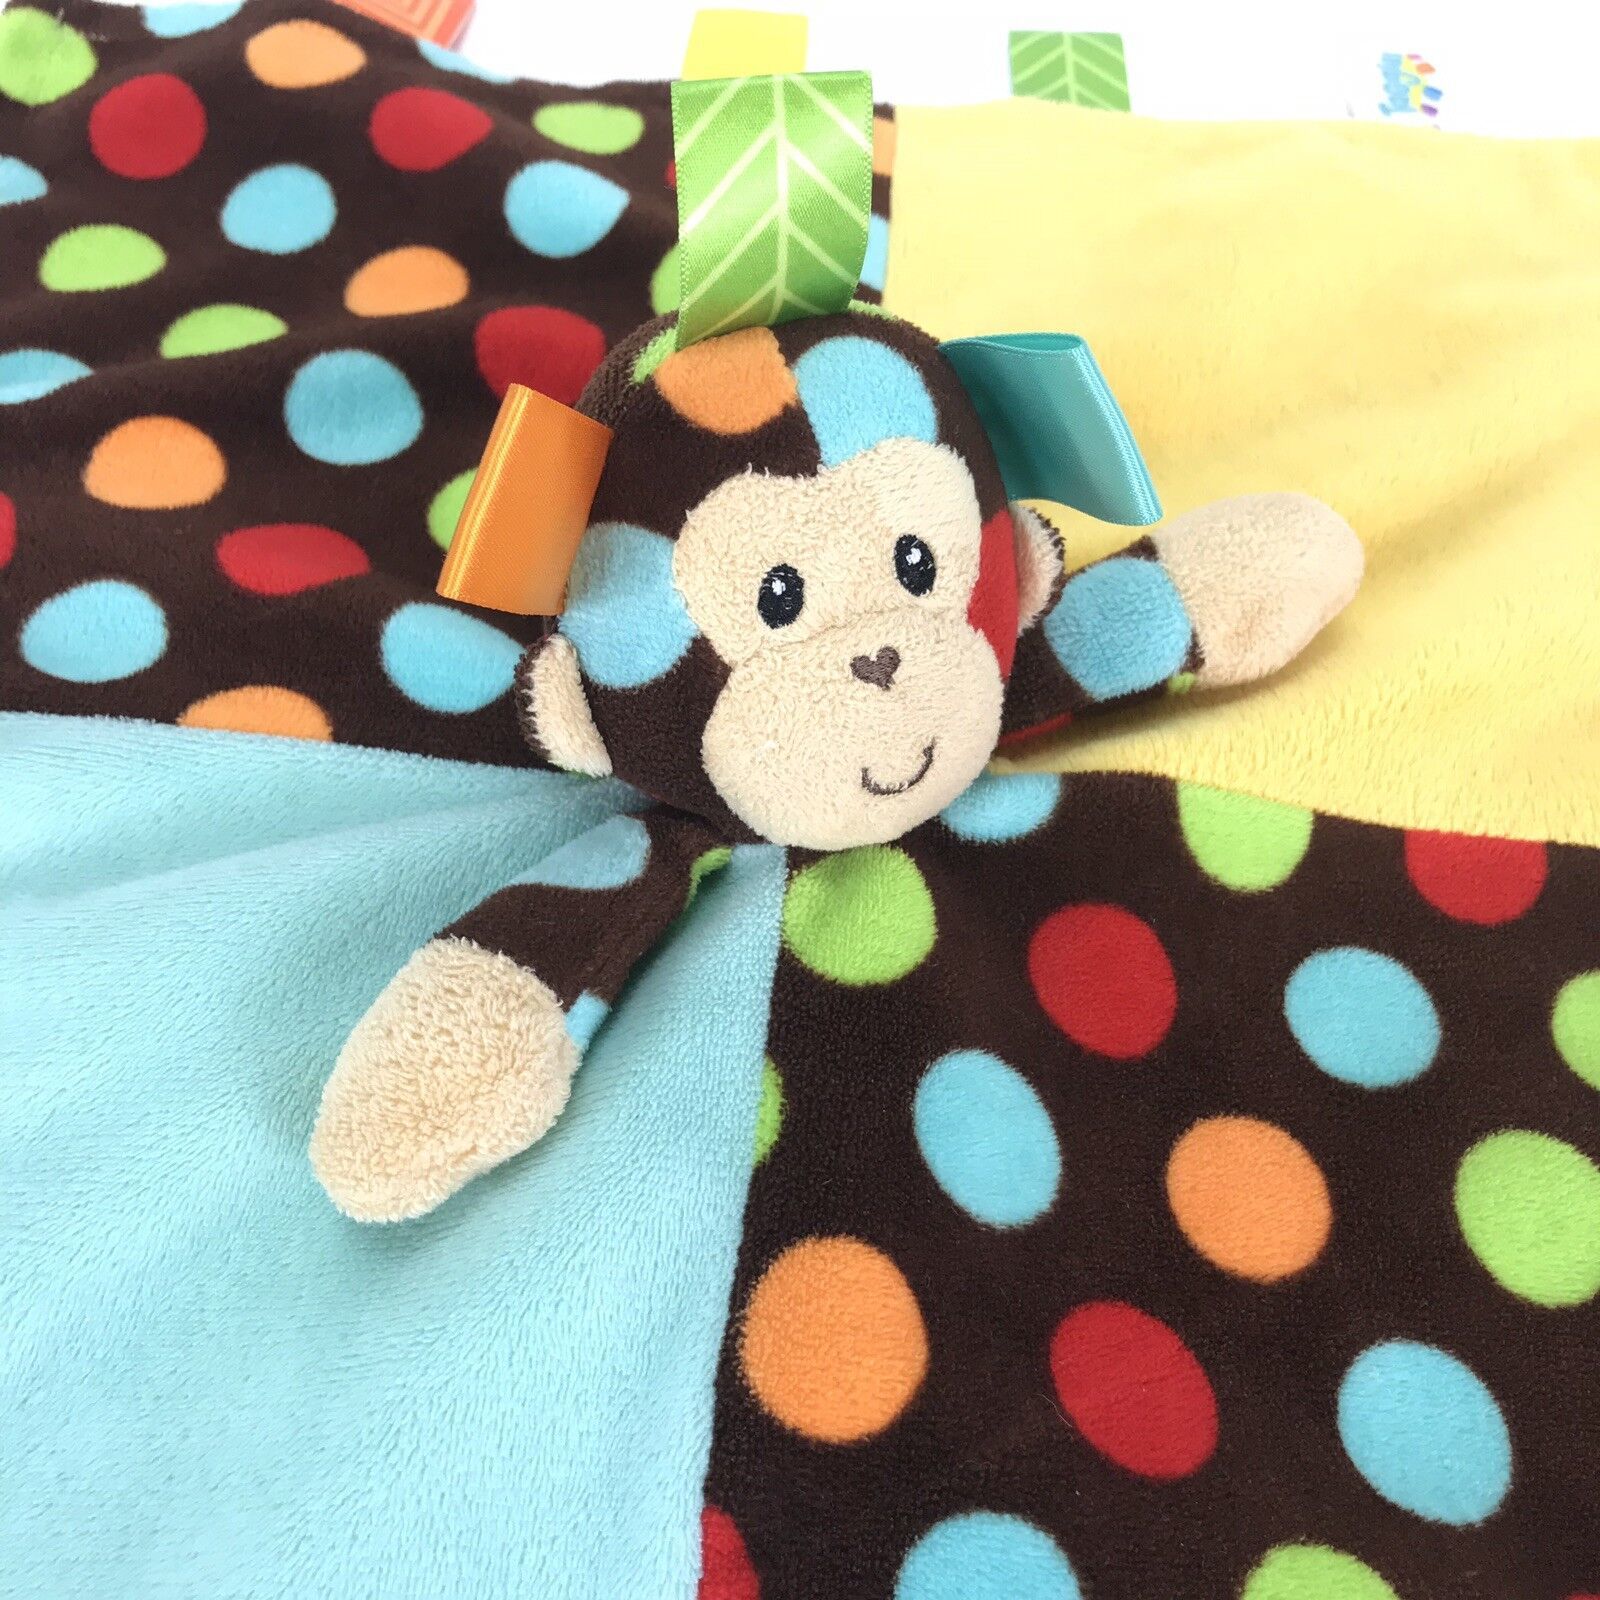 Taggies Monkey Baby Blankie Security Lovey Plush Toy Stimulating Textured Tags - $19.79